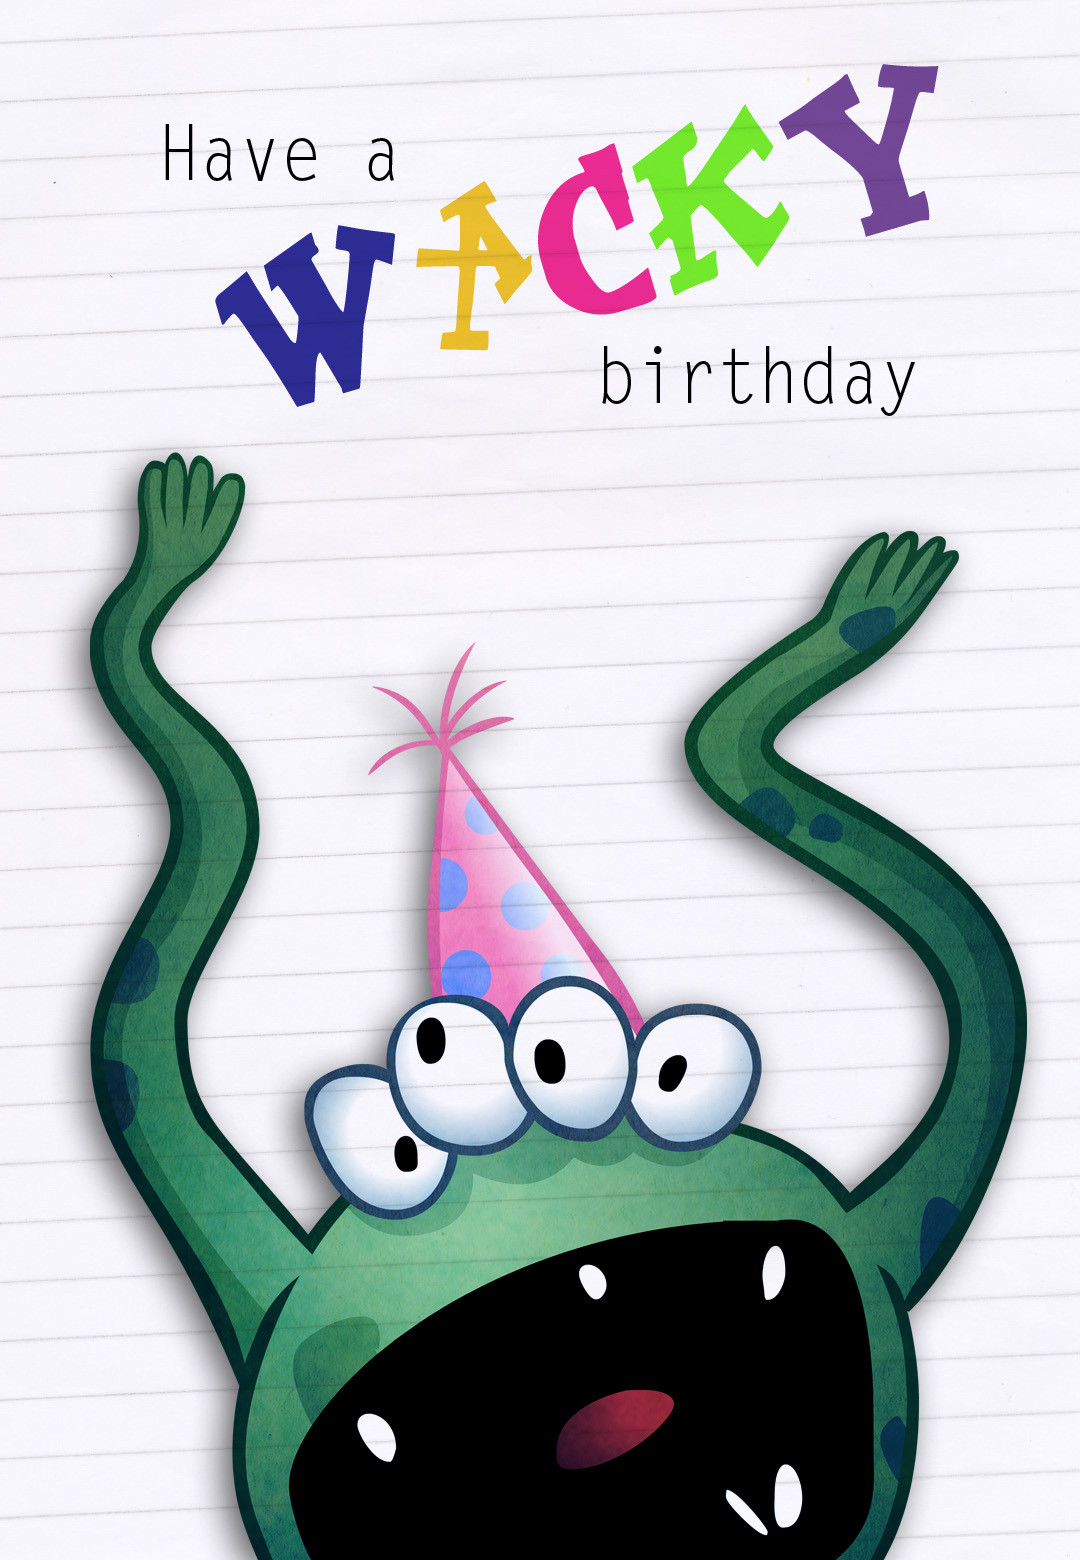 Printable Birthday Cards For Kids
 Funny Four Eyed Monster Birthday Card